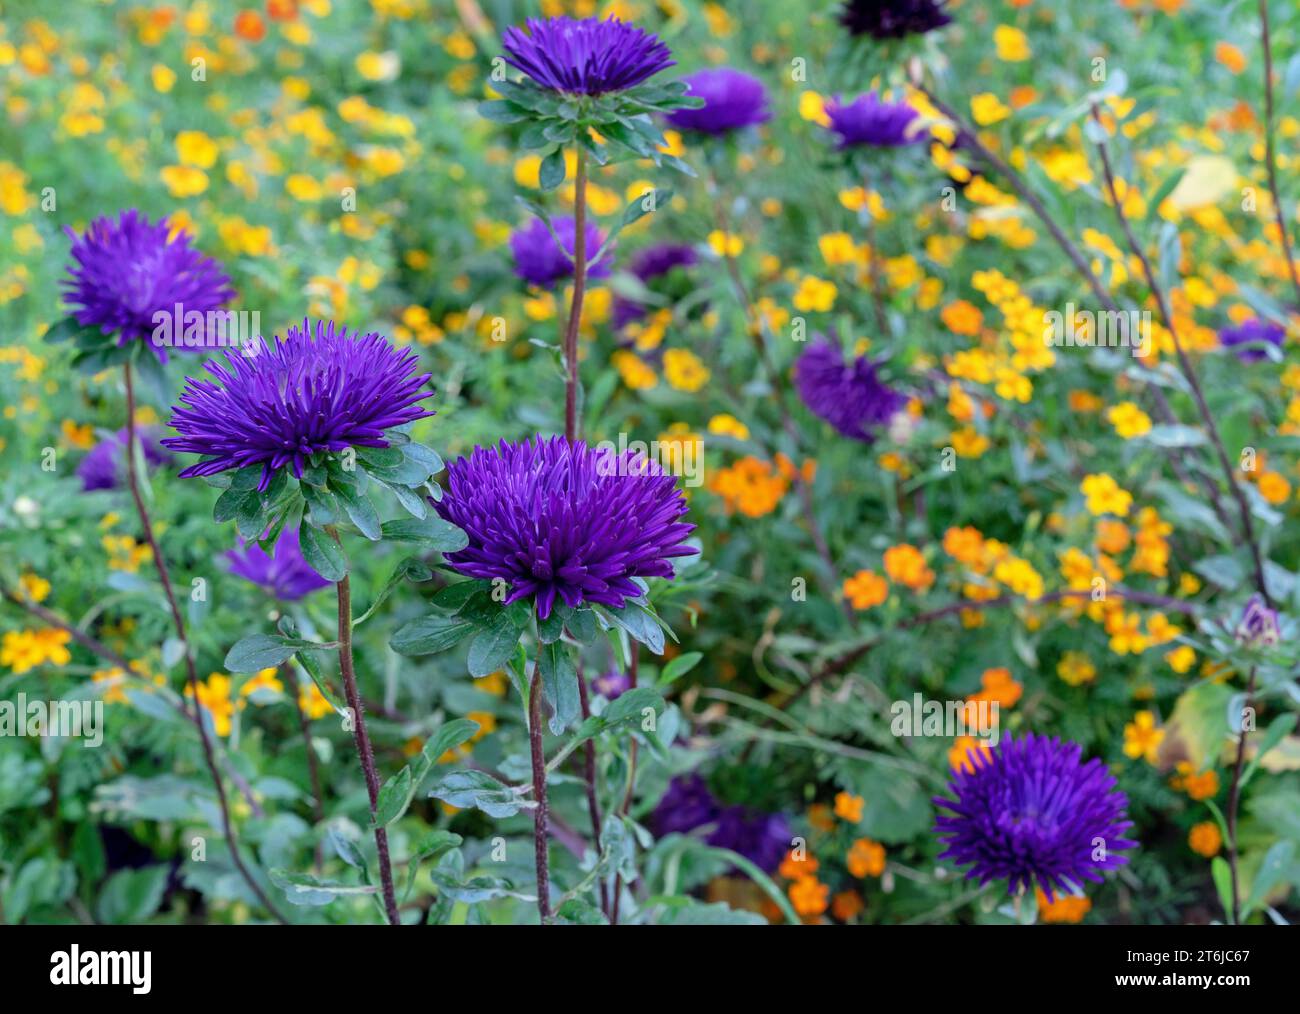 Violet asters or Callistephus chinensis, China asters in the autumn garden. Stock Photo